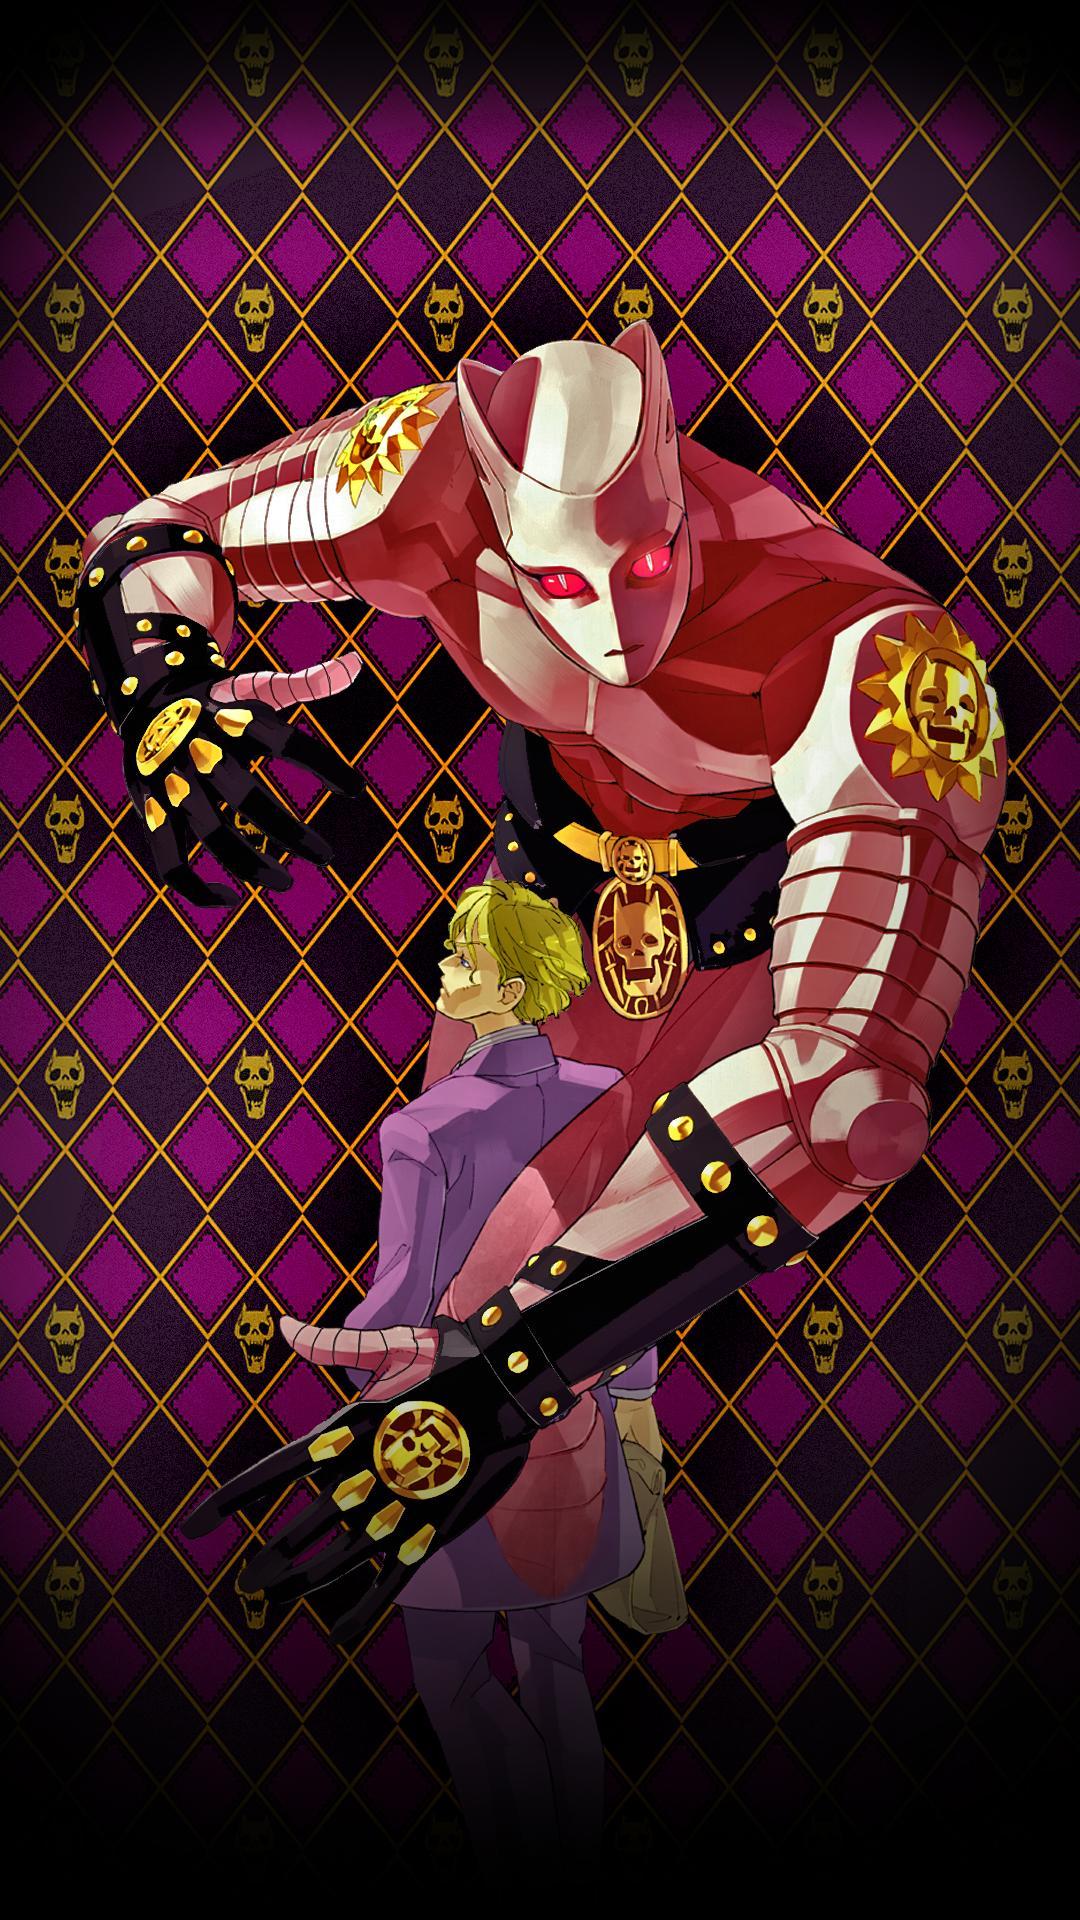 Fanart With all these Killer Queen wallpaper going around, I